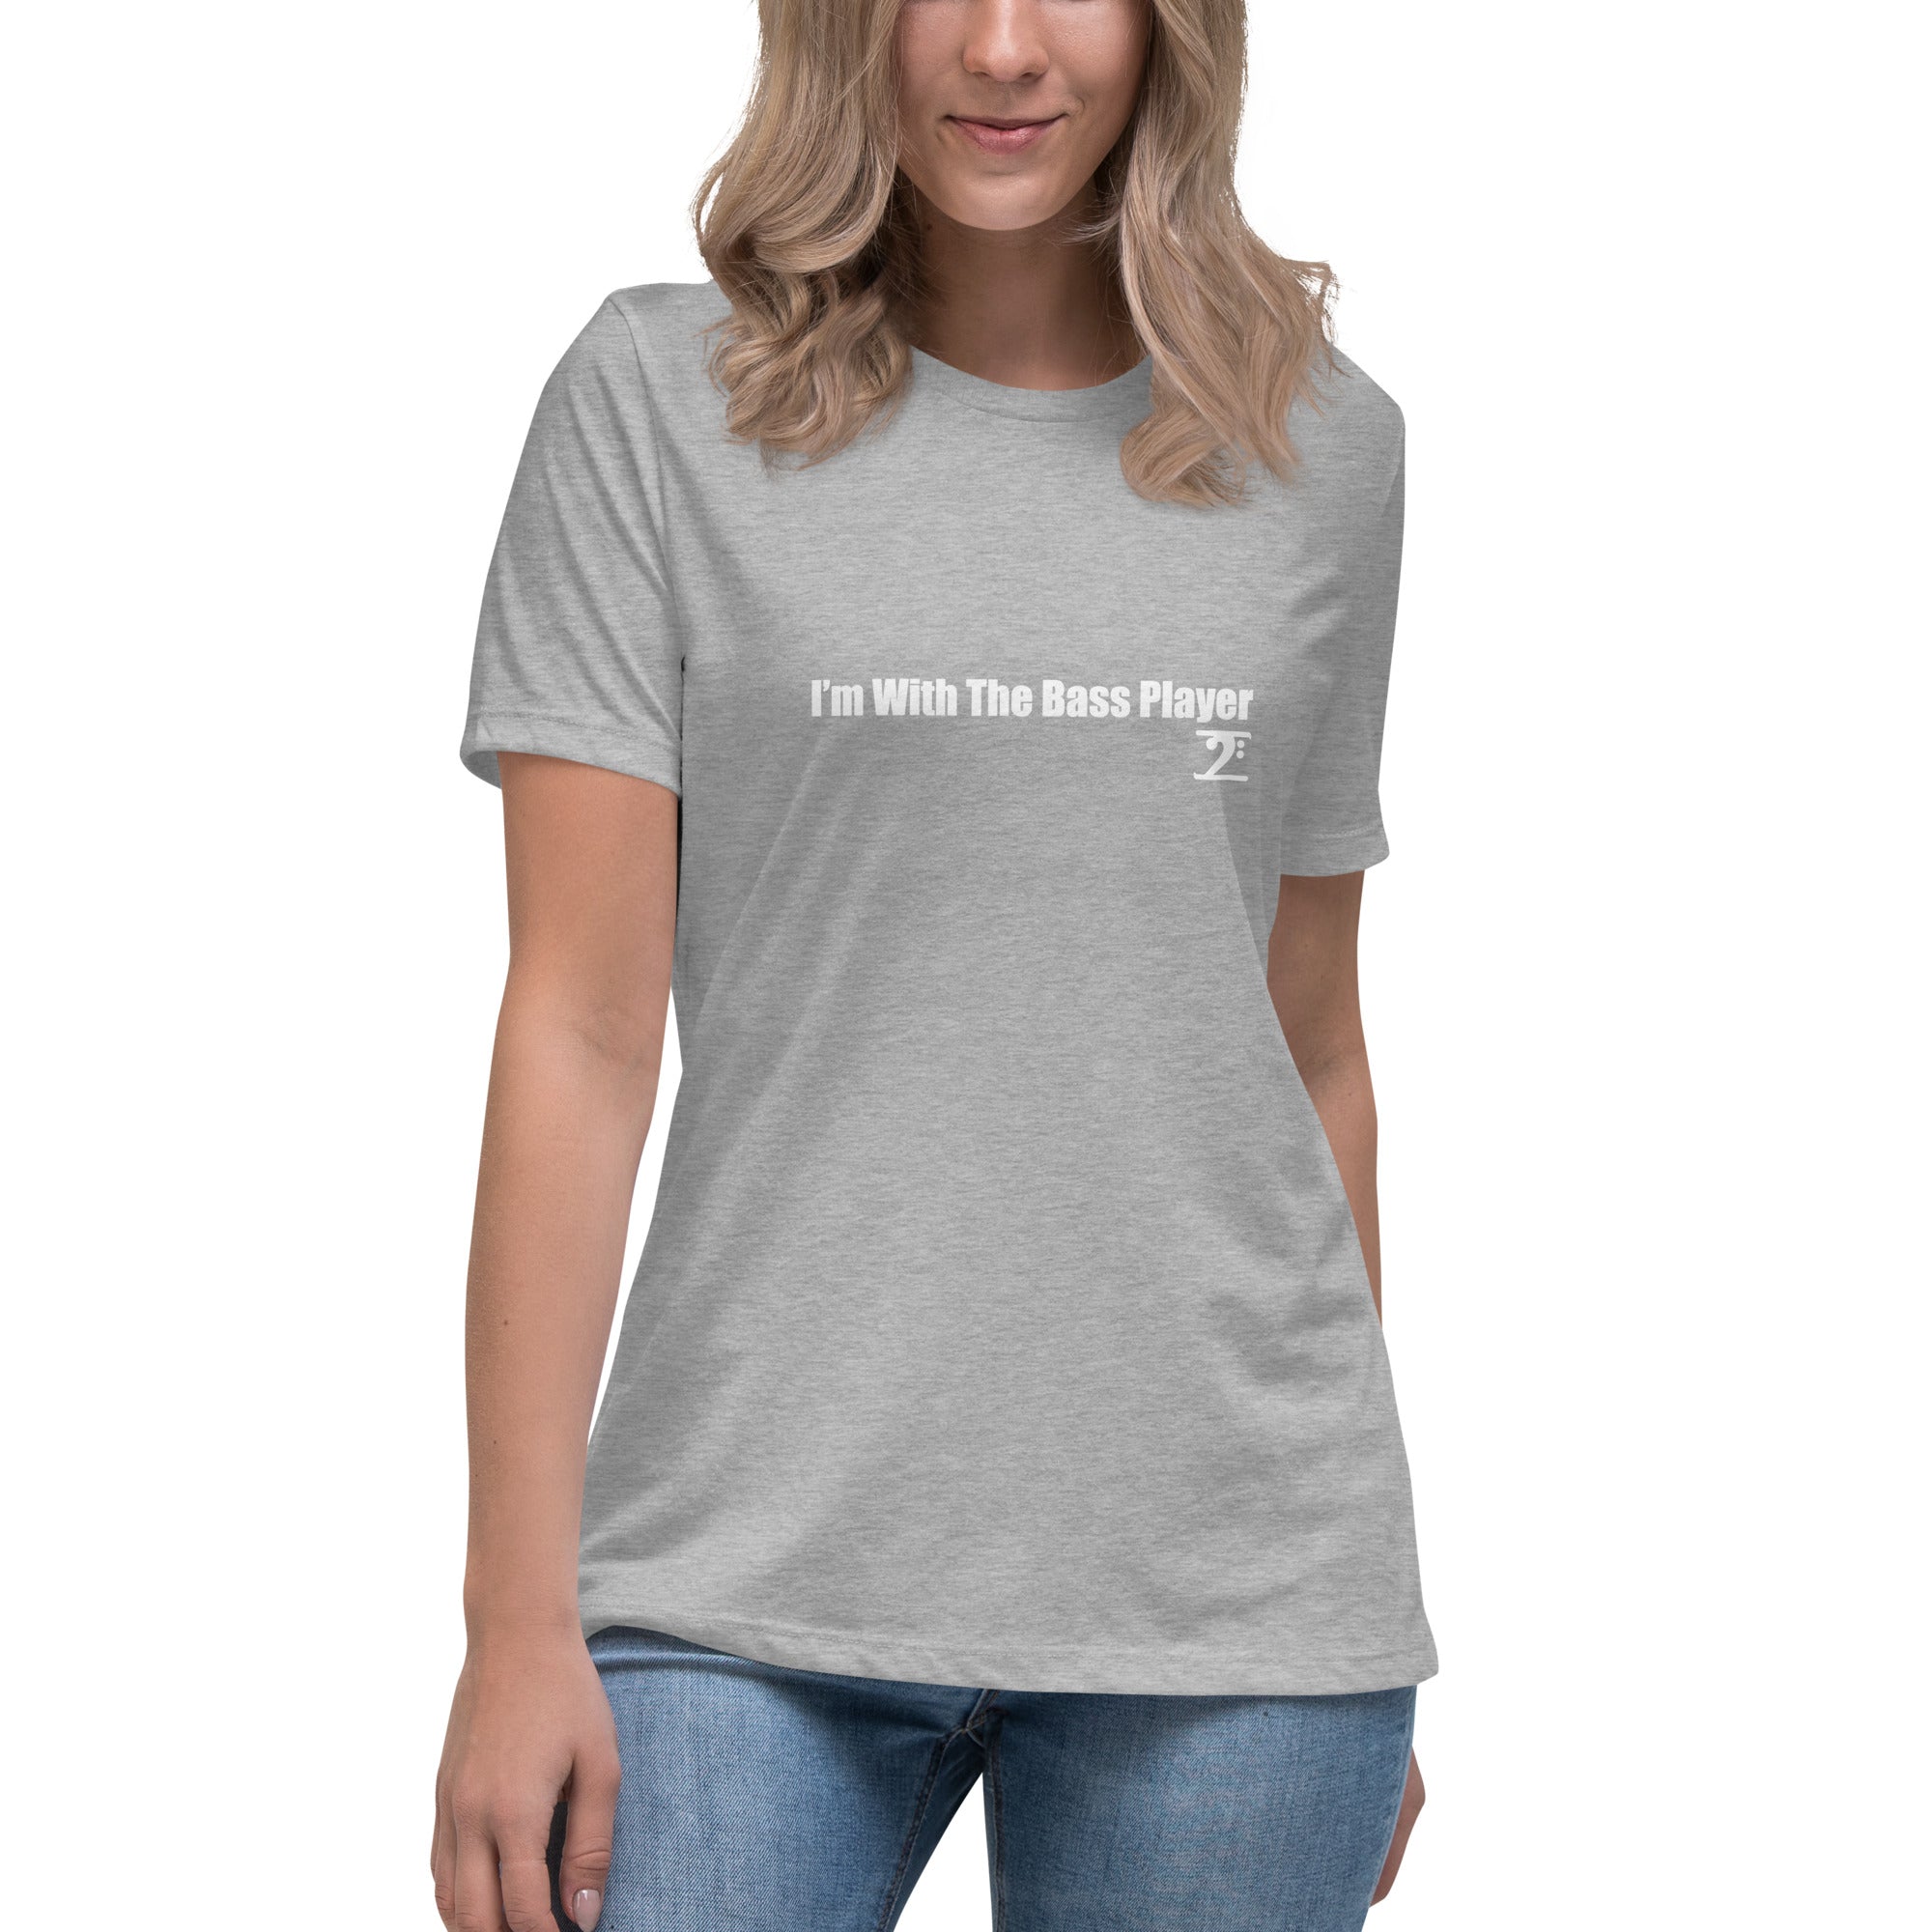 I'M WITH THE BASS PLAYER Women's Relaxed T-Shirt